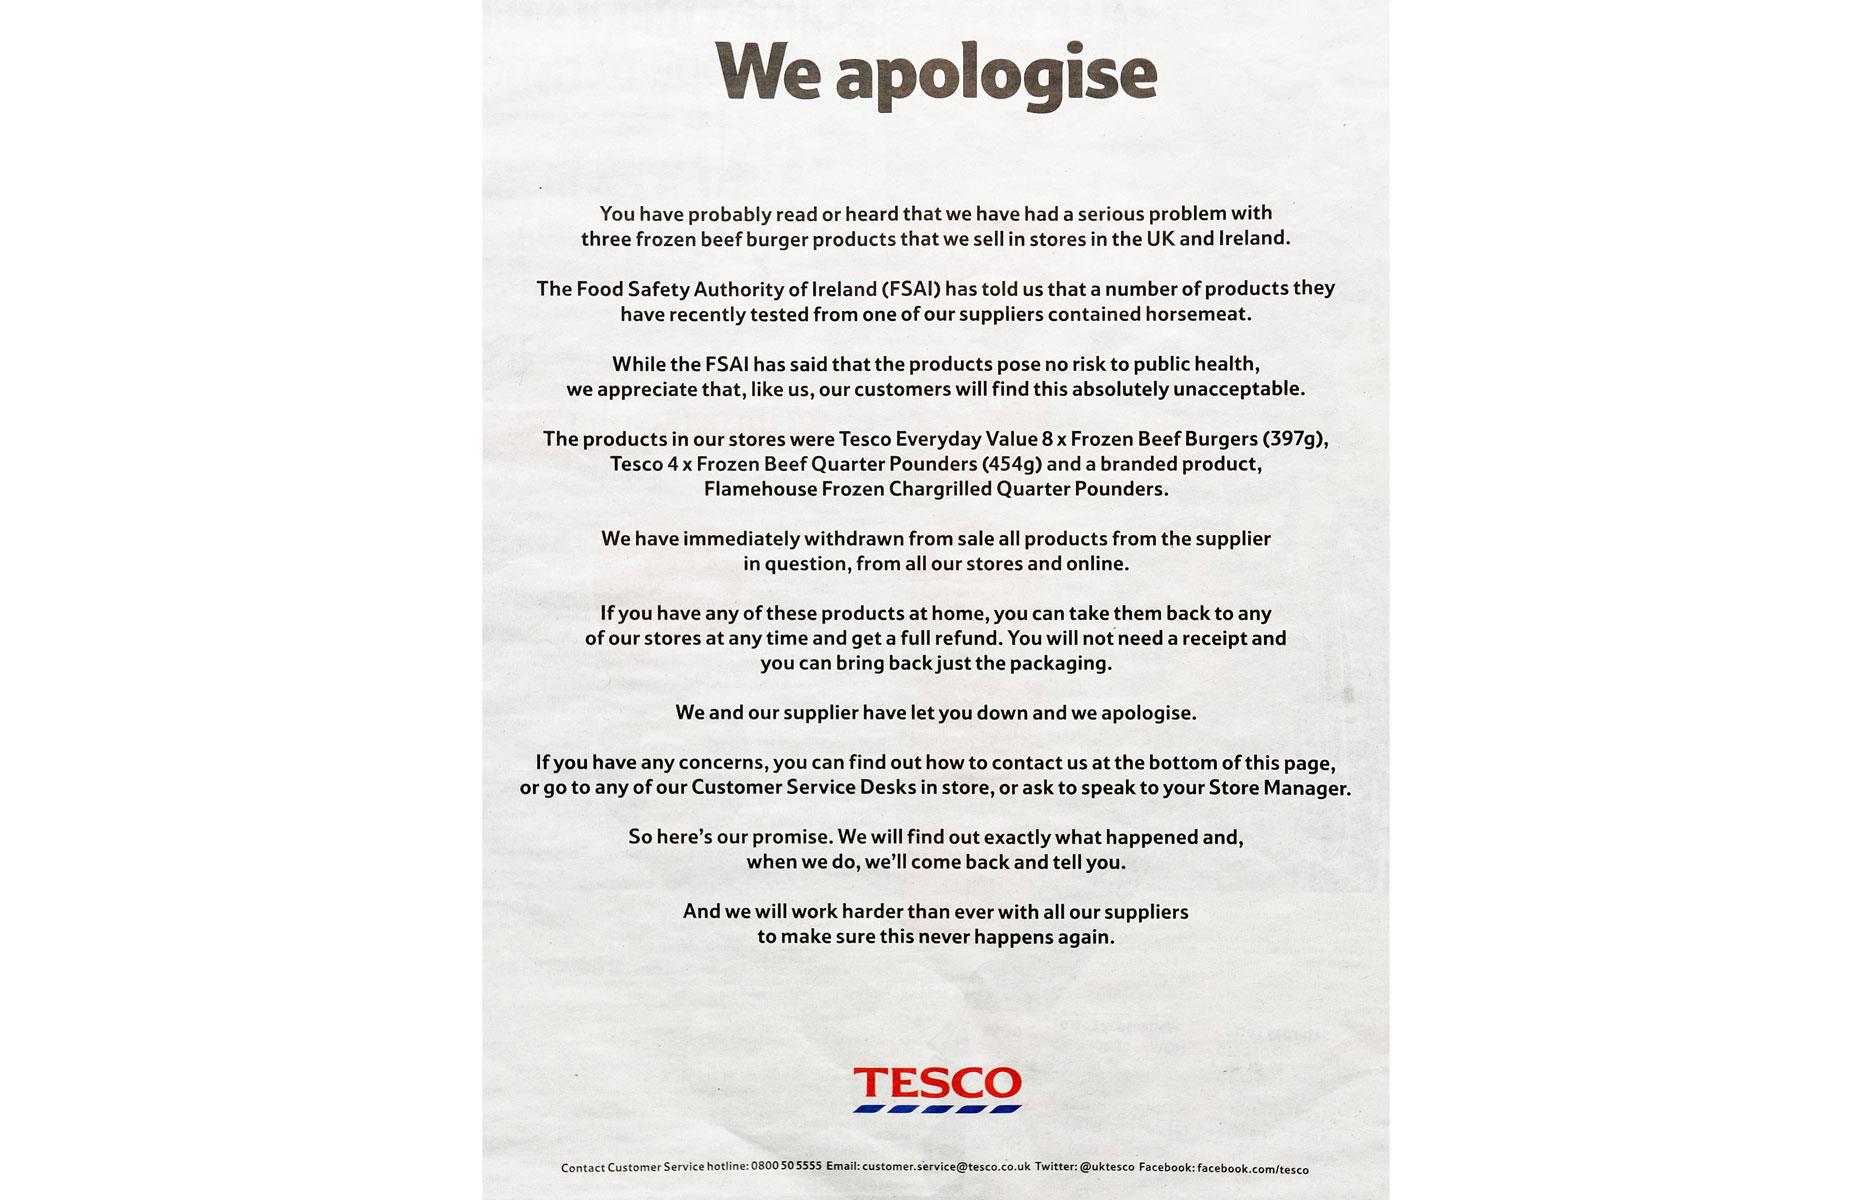 Horse meat scandal: Tesco apologises over 'hay' Twitter post